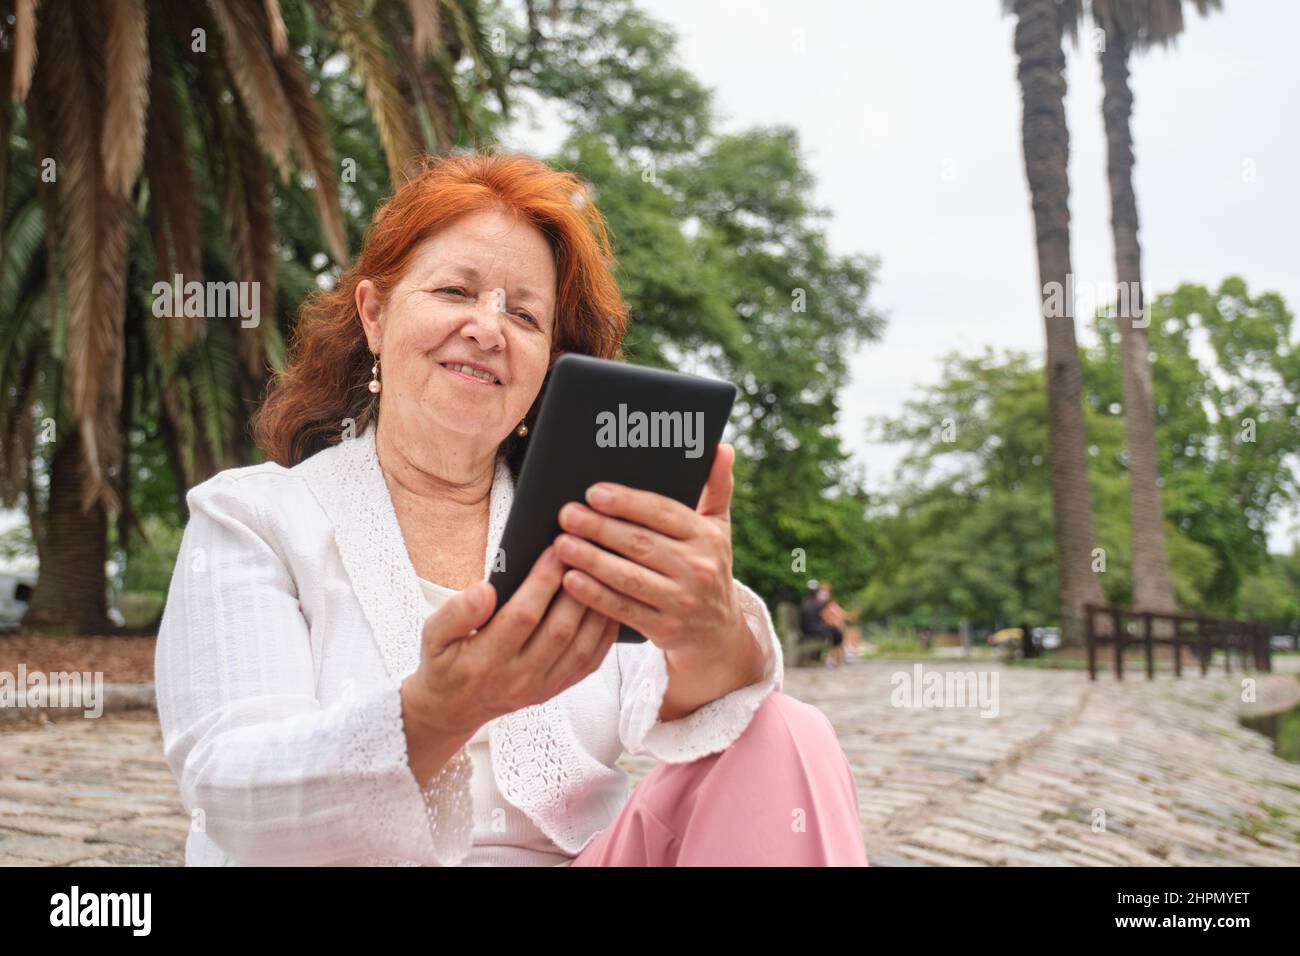 Mature hispanic woman reading an ebook on an electronic reader sitting in a park. Concepts: technology and reading. Image with copy space Stock Photo